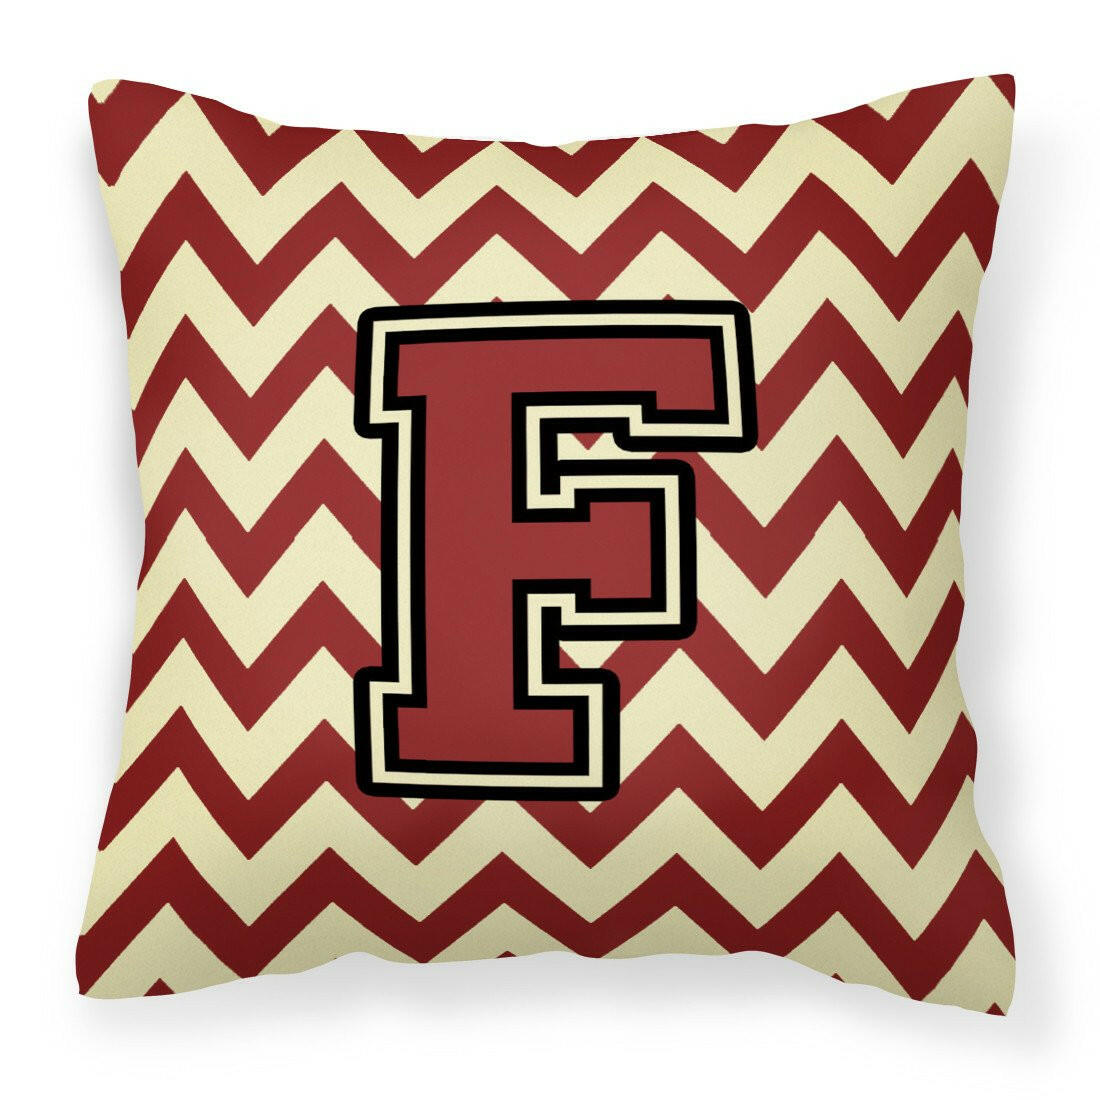 Letter F Chevron Maroon and Gold Fabric Decorative Pillow CJ1061-FPW1414 by Caroline's Treasures